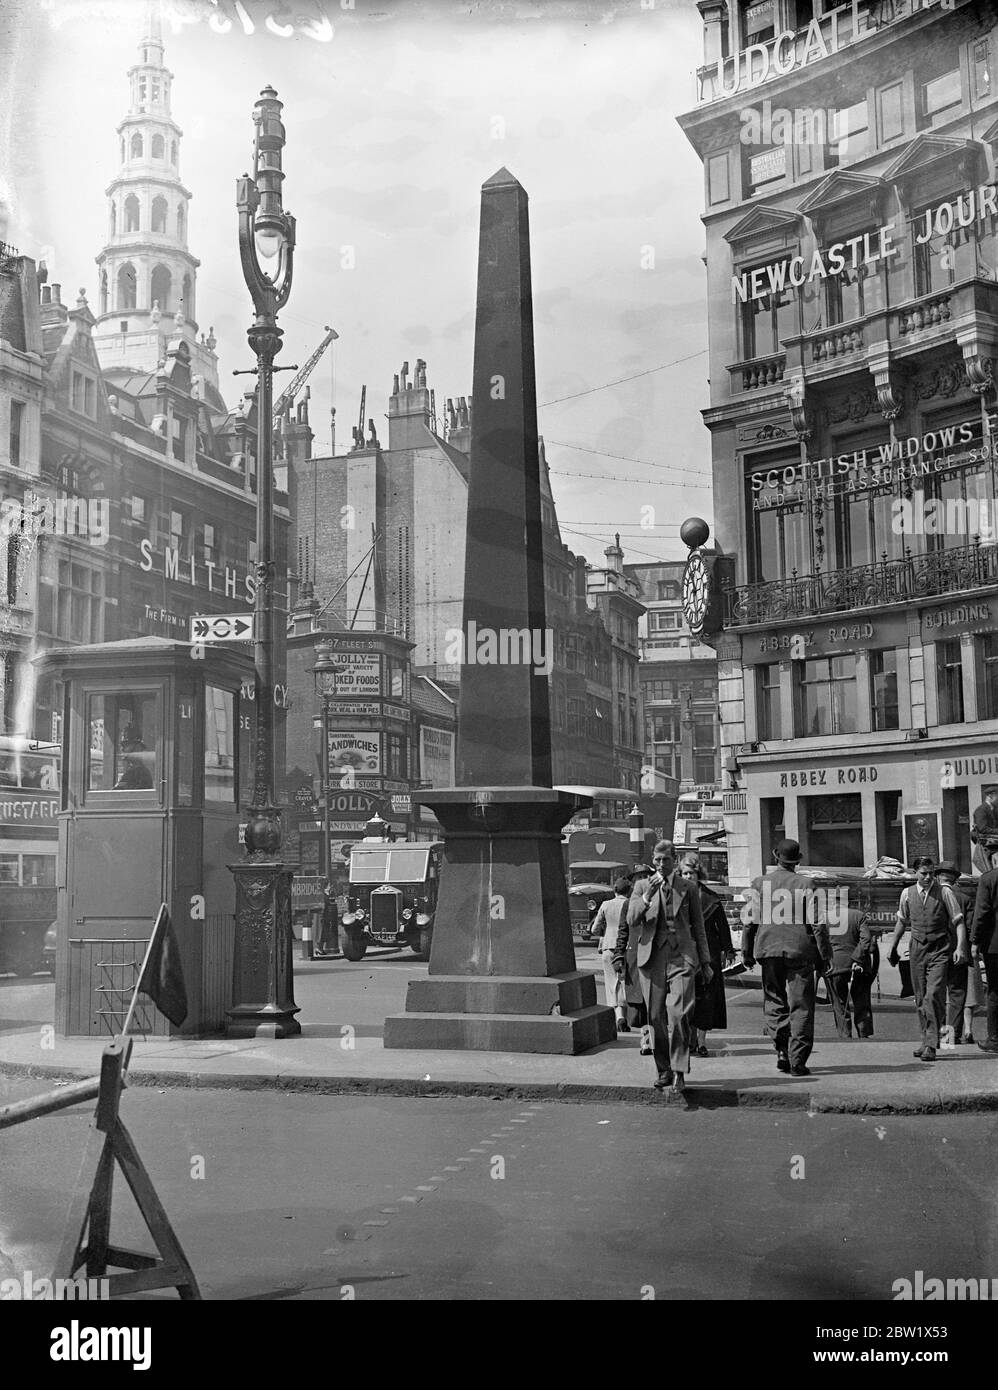 Wrexham wants Ludgate Circus obelisk. Memorial to local boy who made good. Negotiations have been practically completed for the removal of the Ludgate Circus obelisk in memory of Robert Waithman (1764-1833) to Wrexham, where he was born. Waithman, linen draper, patriot and reformer, was one of the most famous men that Wrexham has ever produced. He was elected Sheriff of London and Middlesex in 1820 and Lord mayor of London 1823. The obelisk, now worn, tapering edifice of Devonshire granite, was put up in 1832. Its removal would be part of the plan for relieving traffic congestion in the Circus Stock Photo